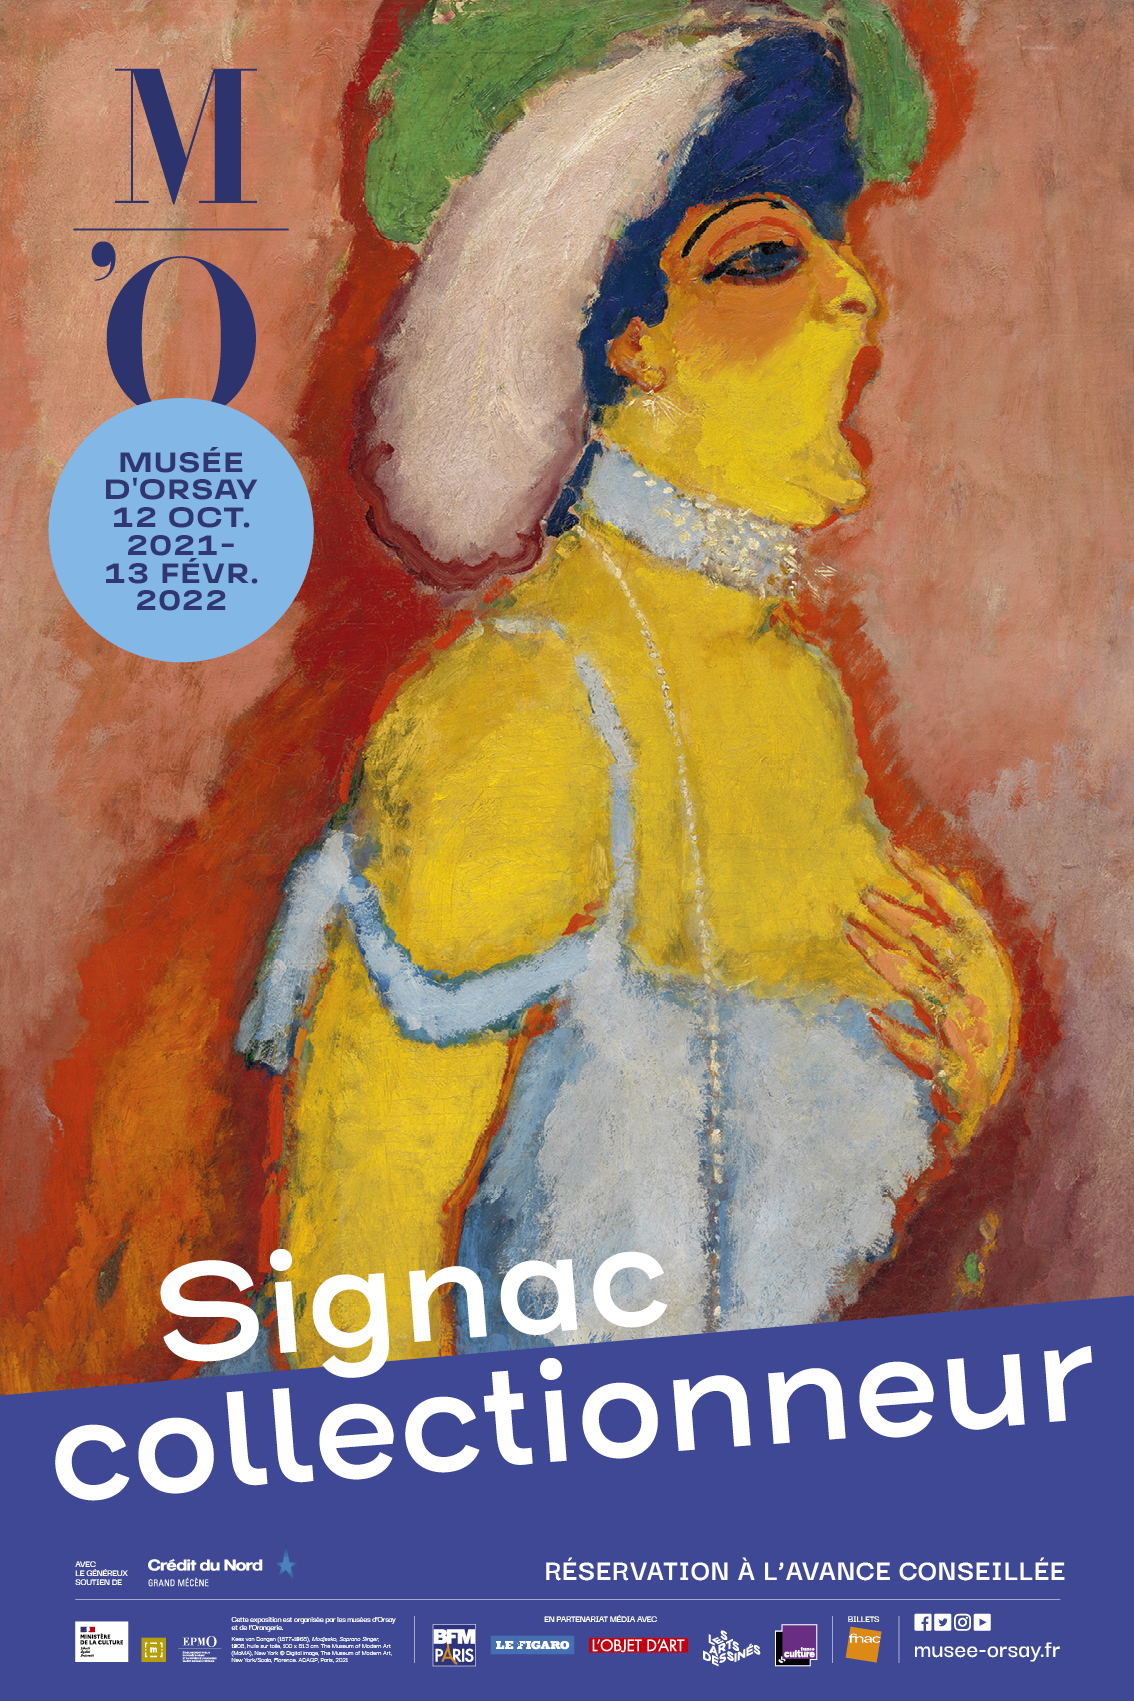 "Signac the art collector", poster of the exhibition © Musée d'Orsay